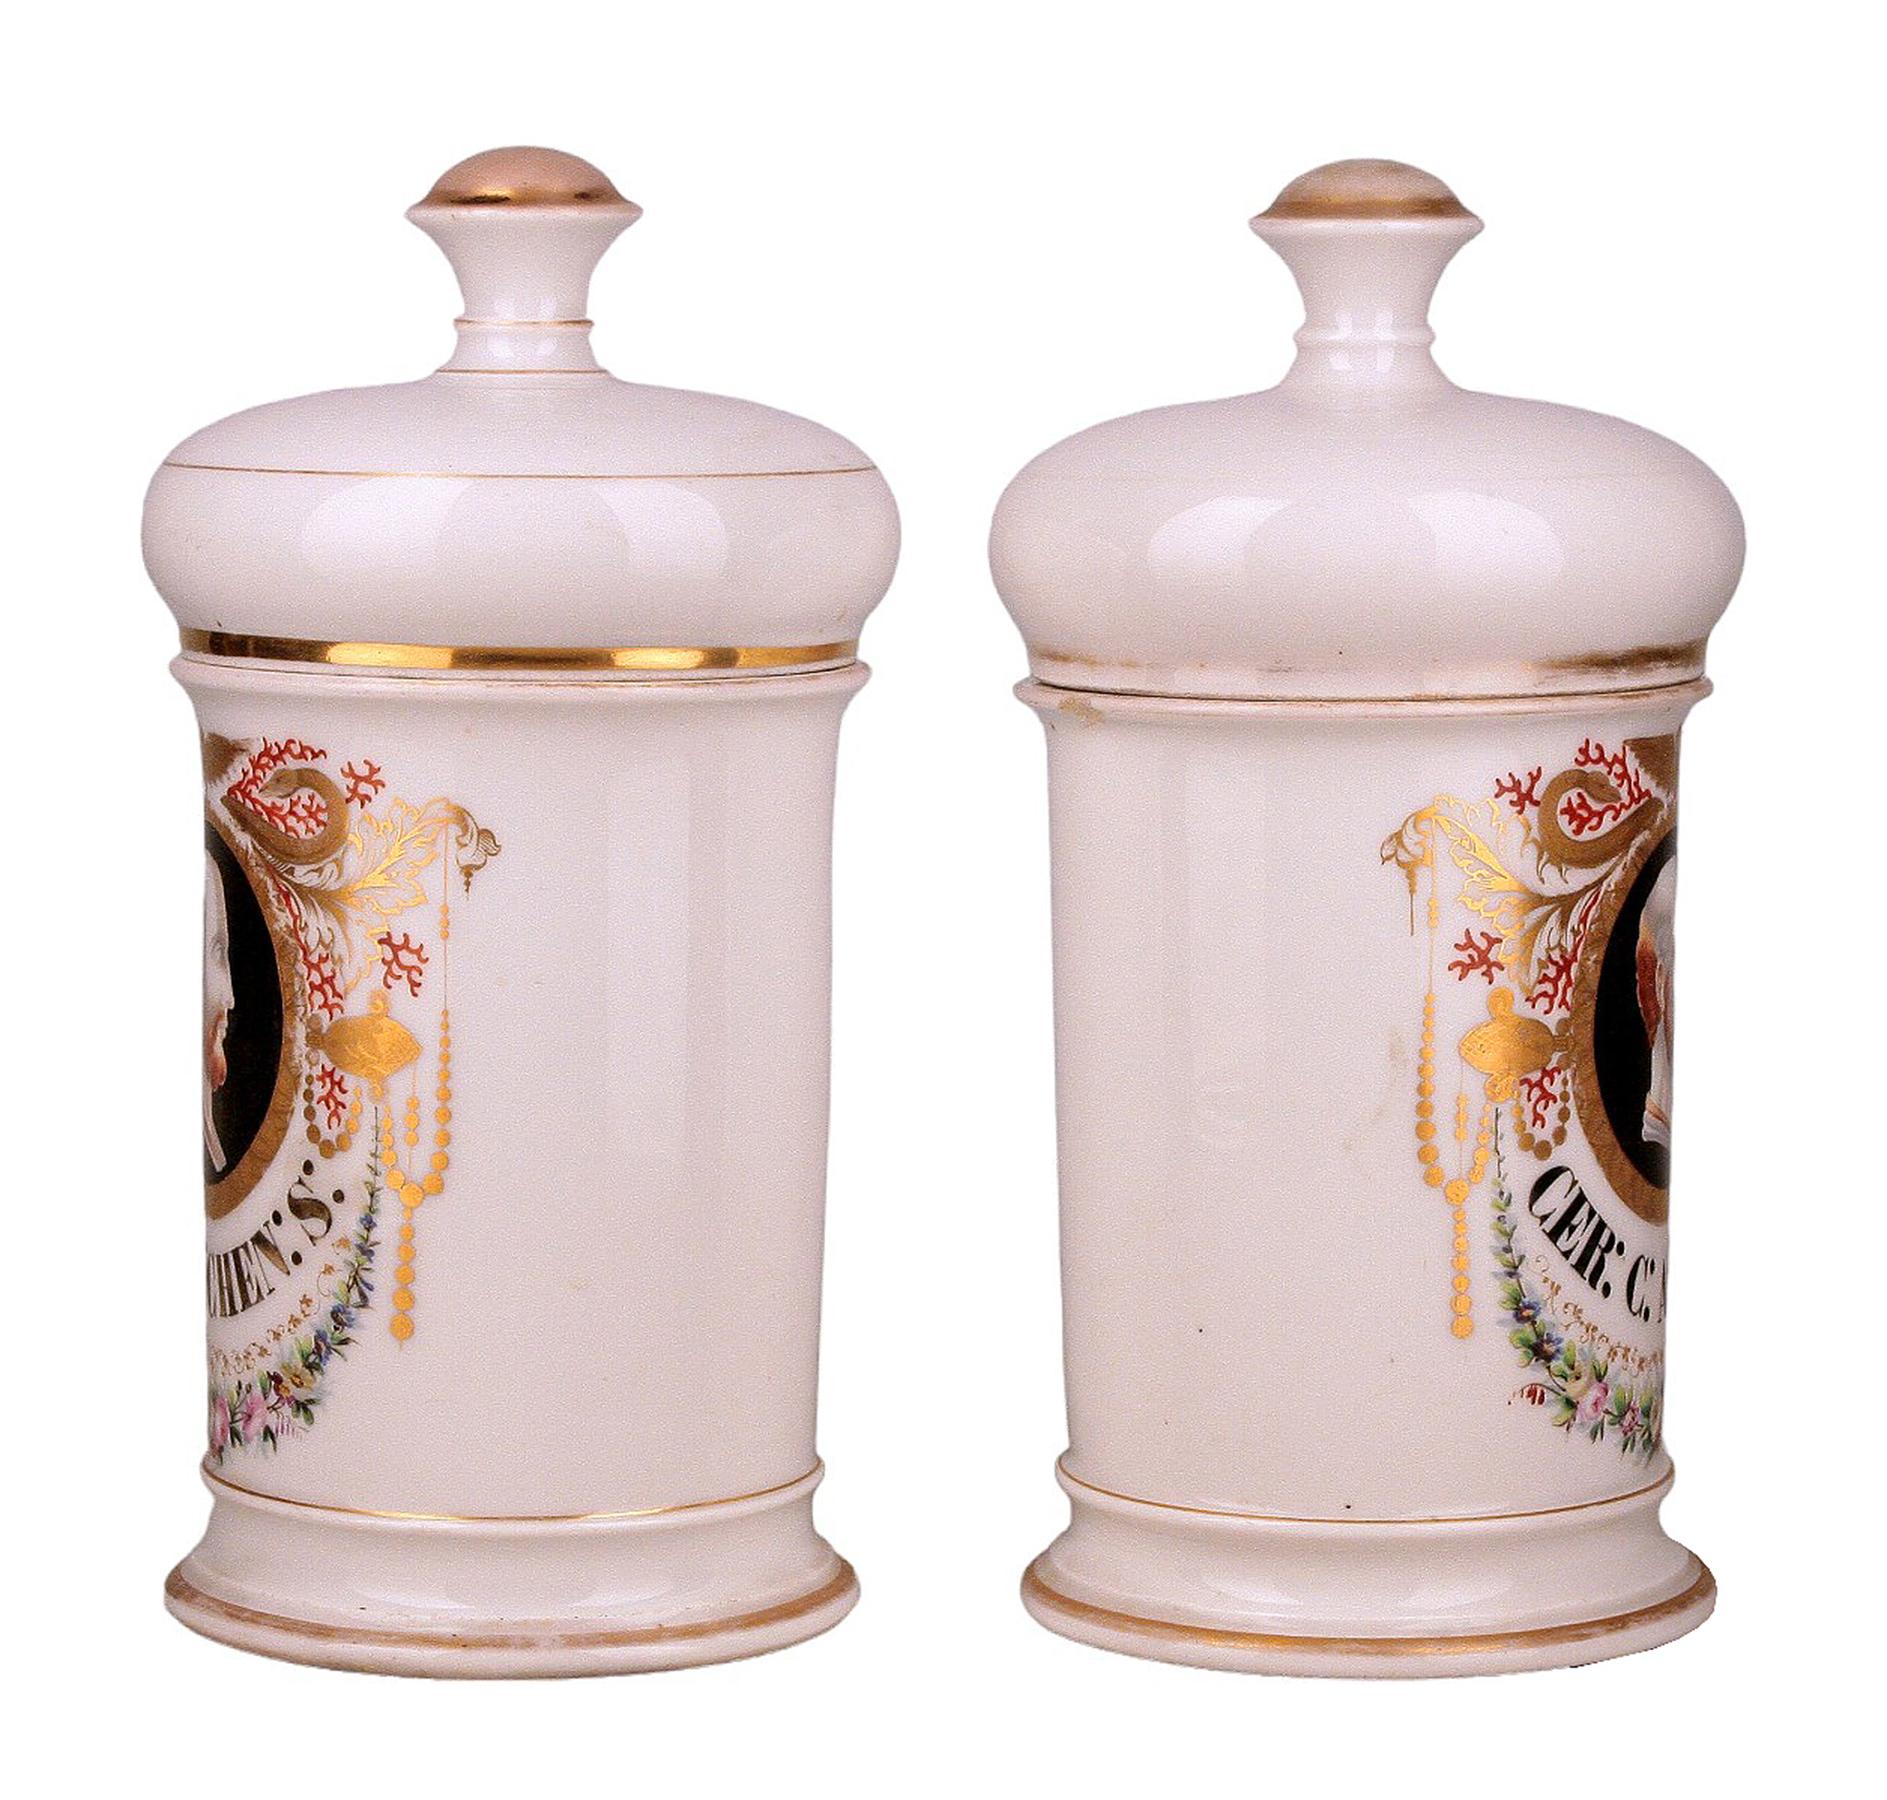 Napoleon III Set of Neoclassical Glazed Porcelain Apothecary/Pharmacy Jars Signed by Langlois For Sale